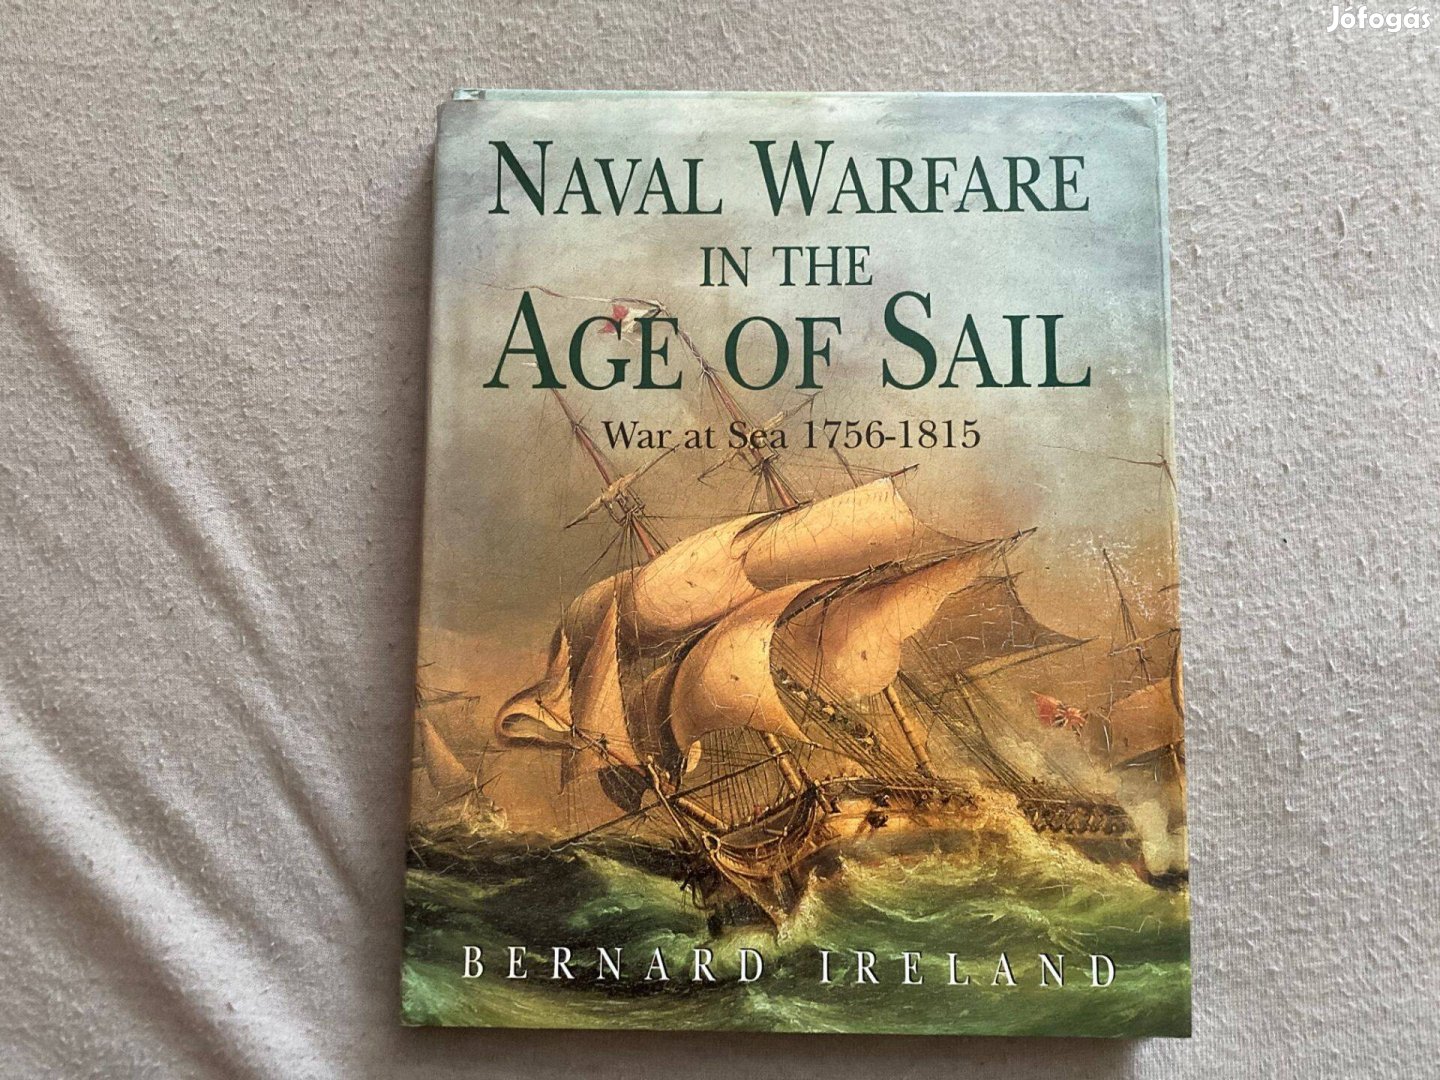 Naval Warfare in the Age of Sail